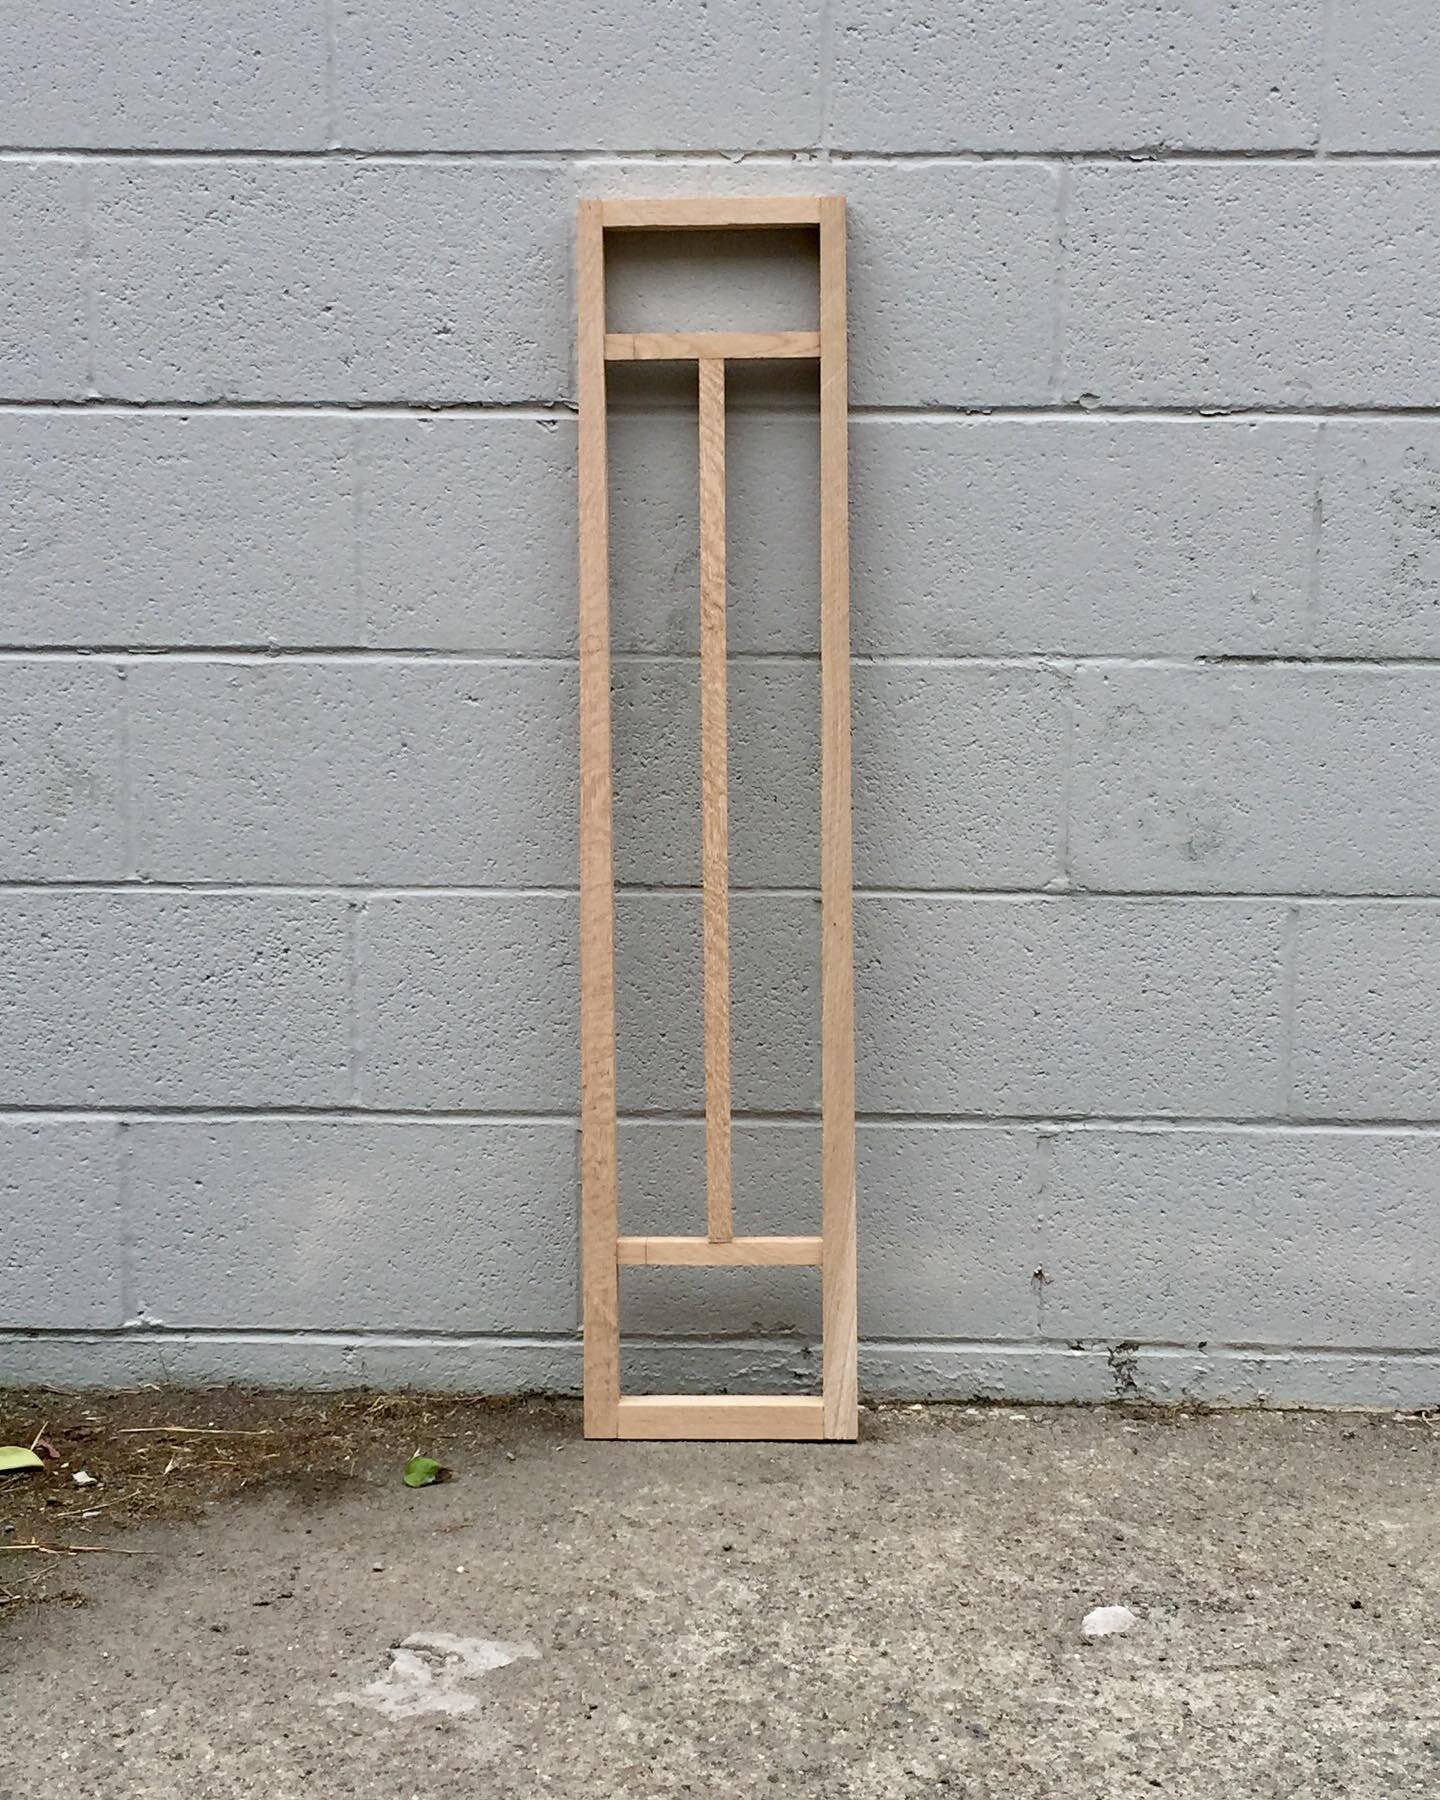 Here&rsquo;s a mock-up of the baluster frame for the stair rail in north Berkeley. I am always amazed by the number of different approaches one can implement to get to the same end.  The mockups allow me to consider different options for each cut or 